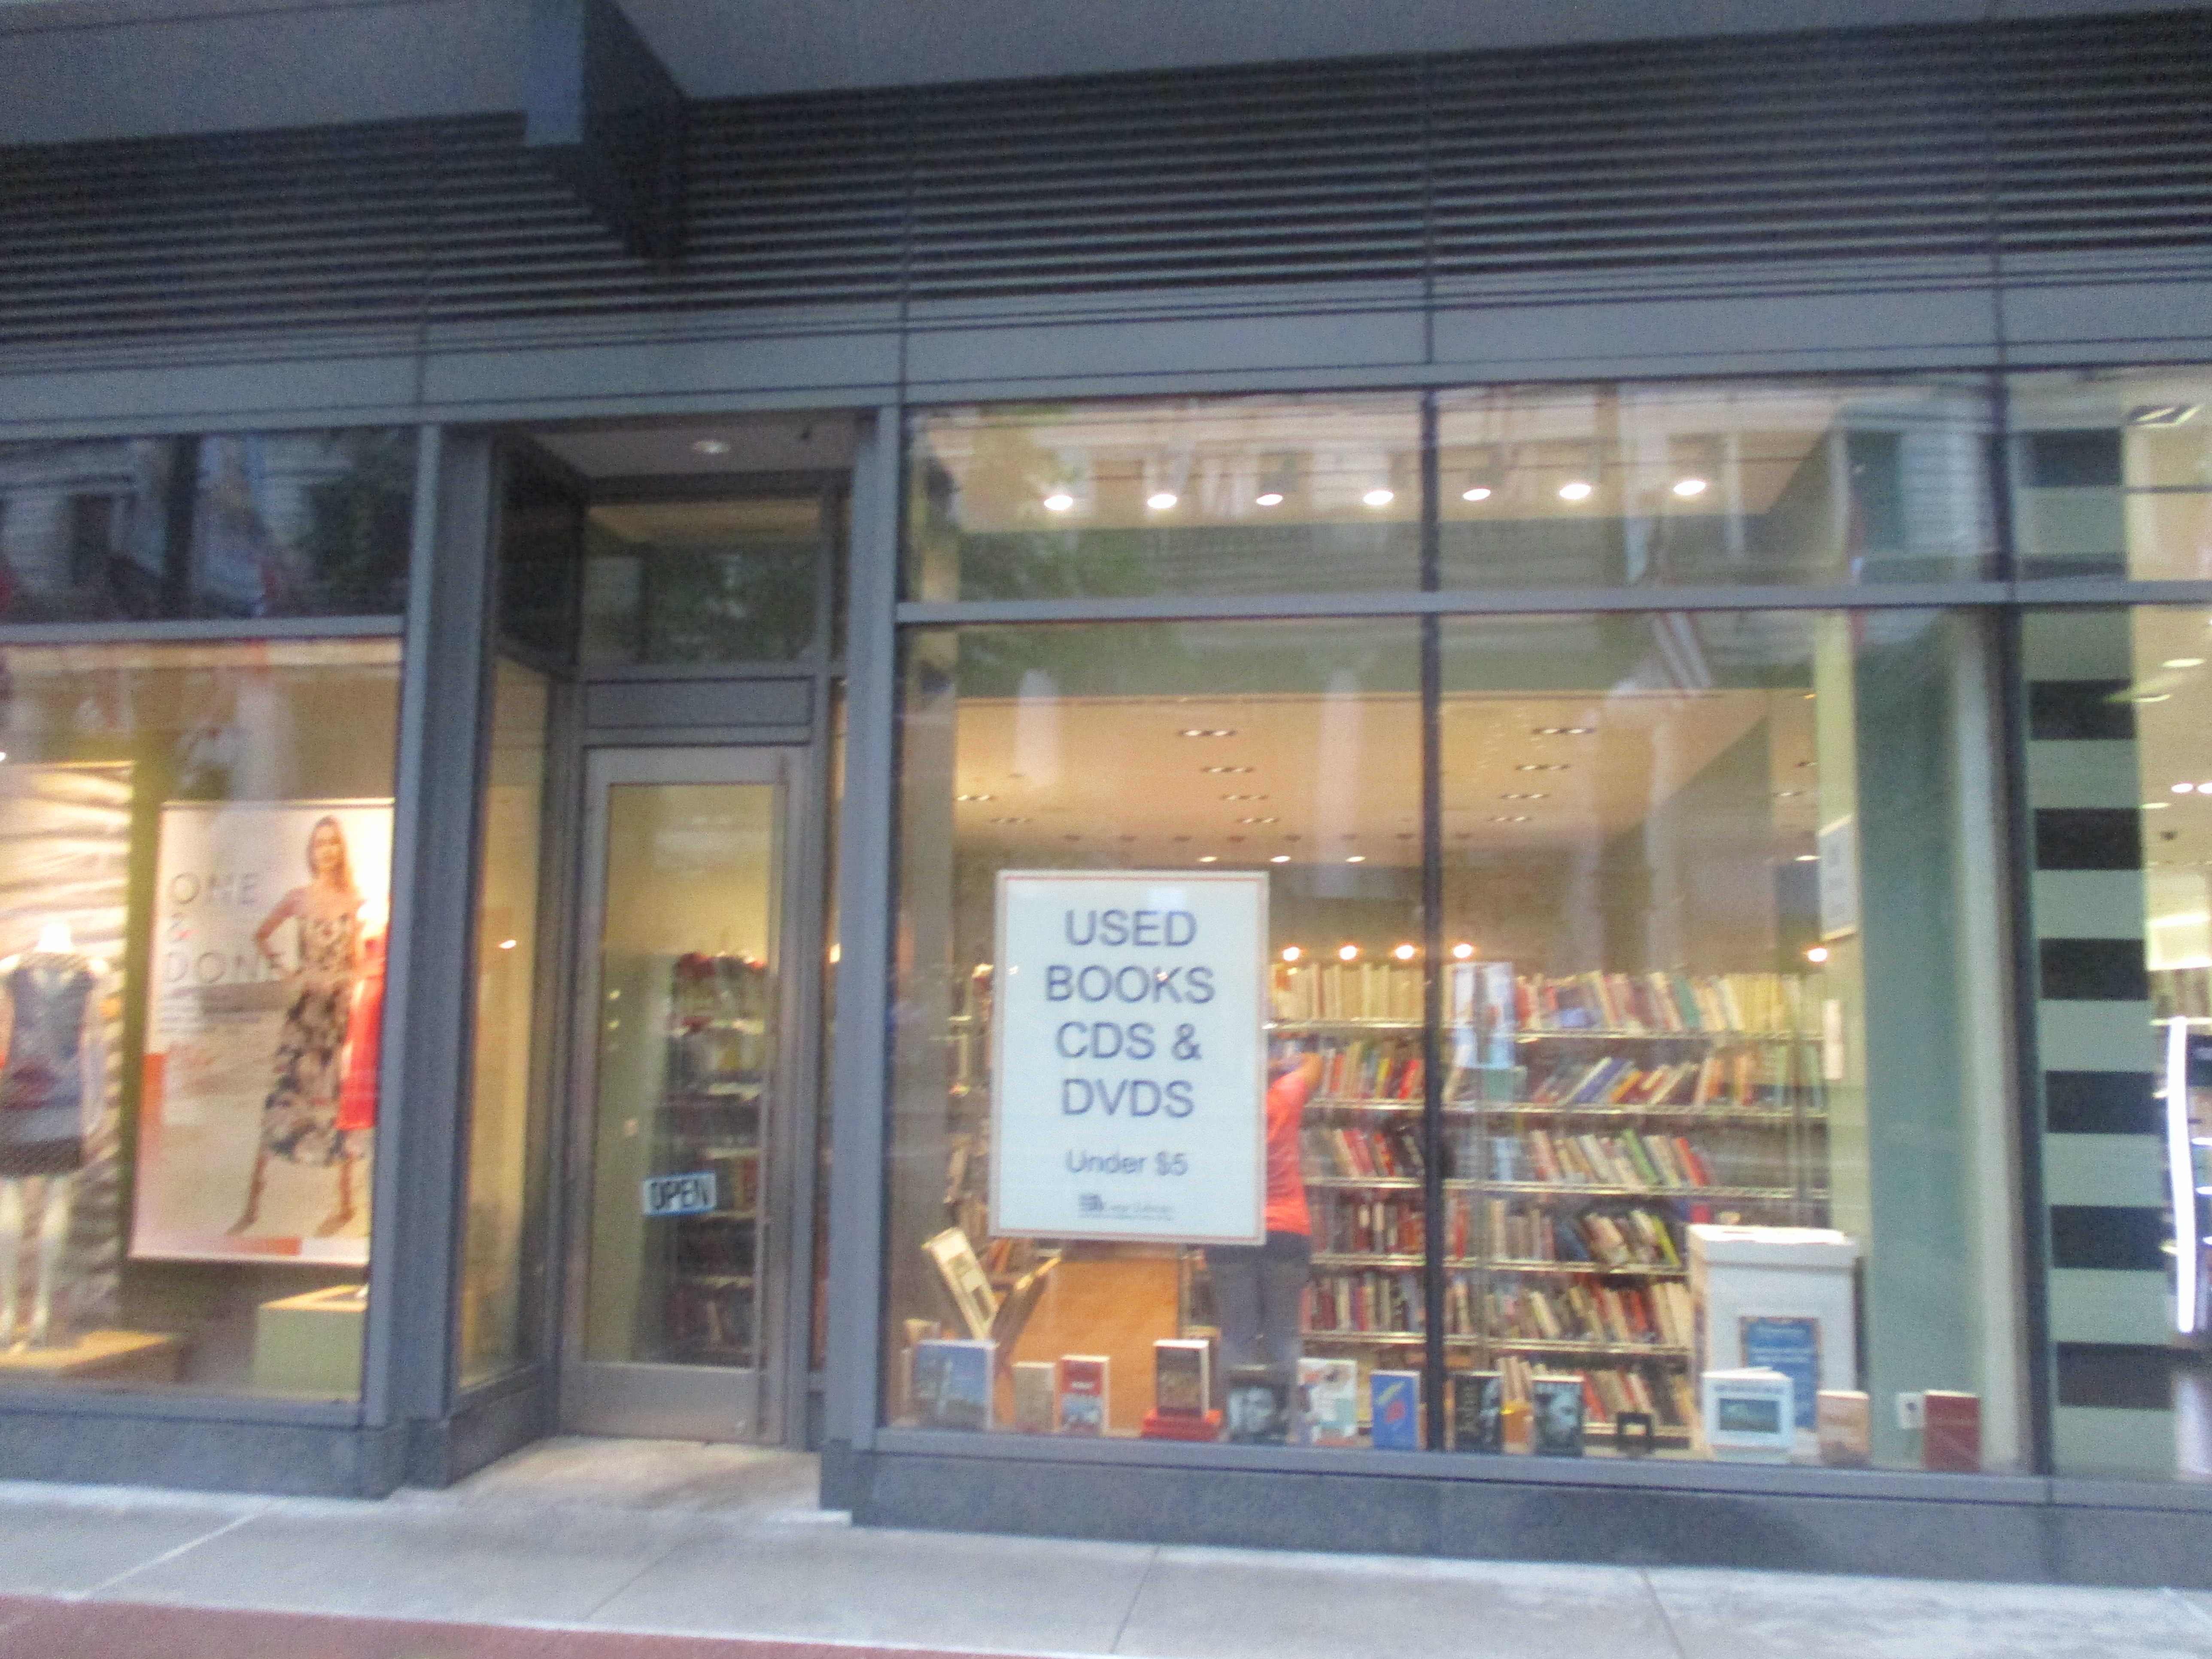 A pop-up bookstore on Chicago's West Side offers pay what you can